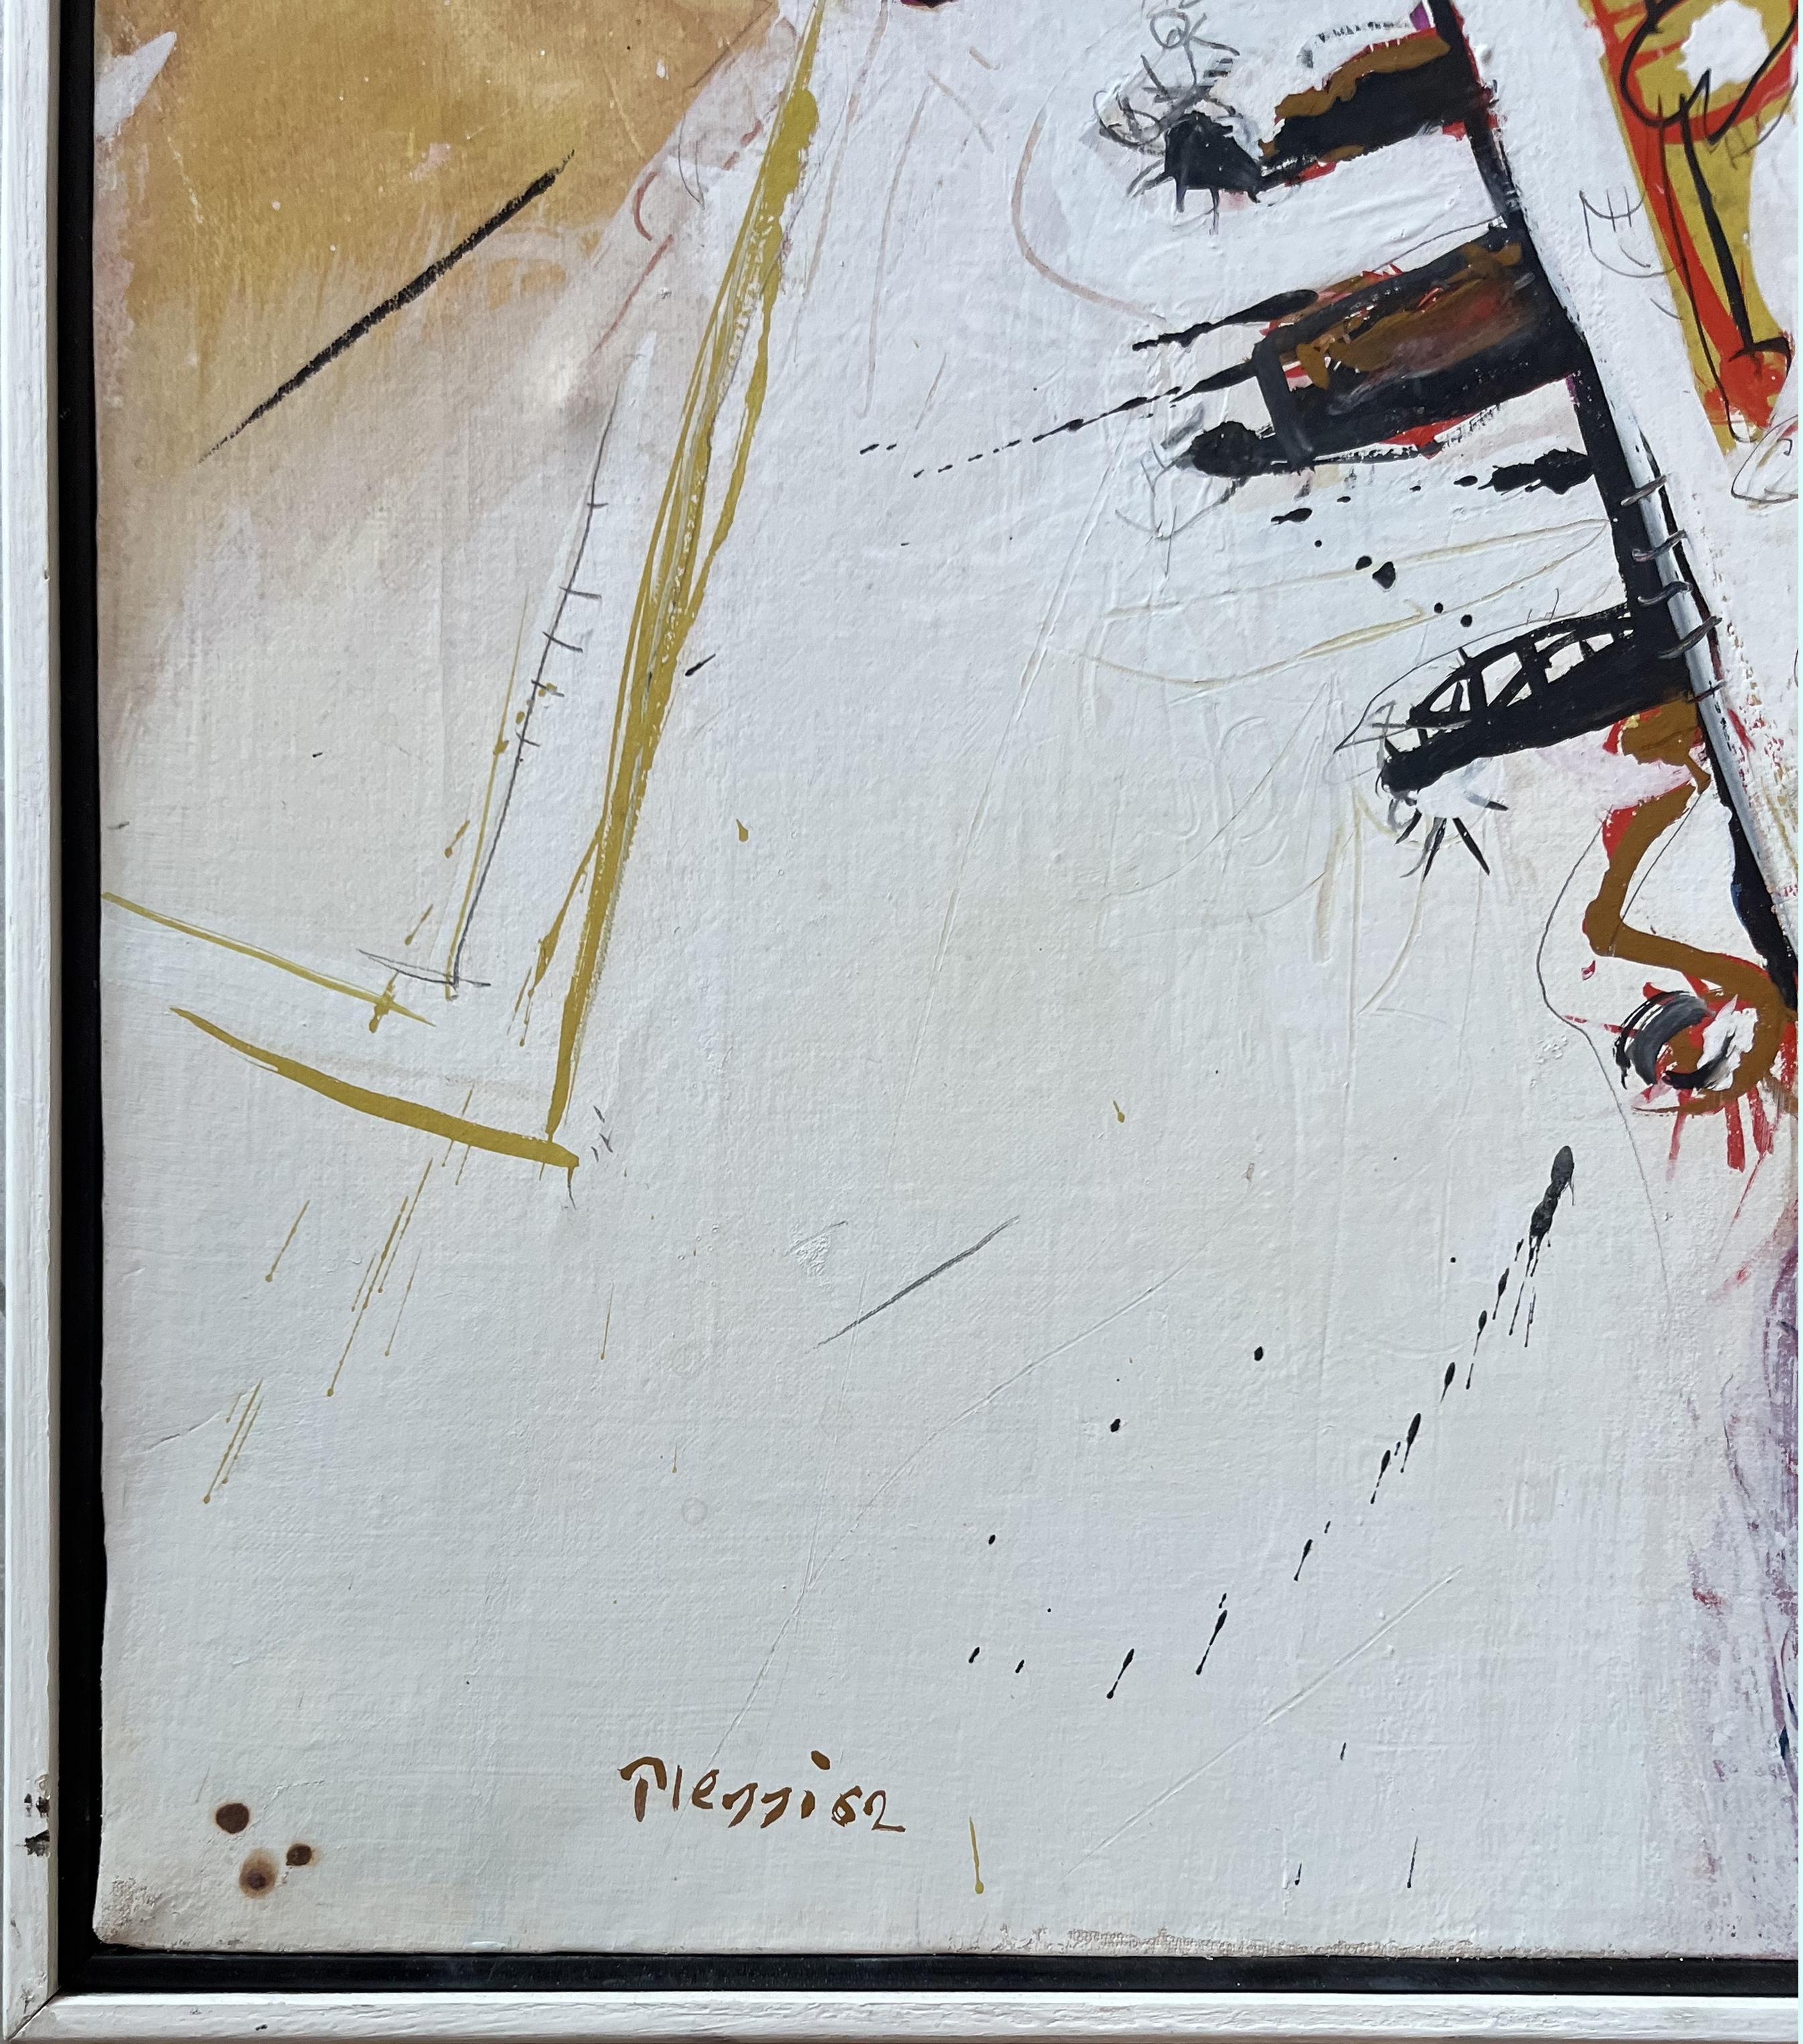 SENZA TITOLO
1962

Tecnica mista su tela 
Mixed media on canvas 

Senza cornice/Without frame: cm 70 x 70
Con cornice/With frame: cm 73 x 73

Firma e data in basso a sinistra “Plessi 62” 
Signed and dated lower left “Plessi 62”